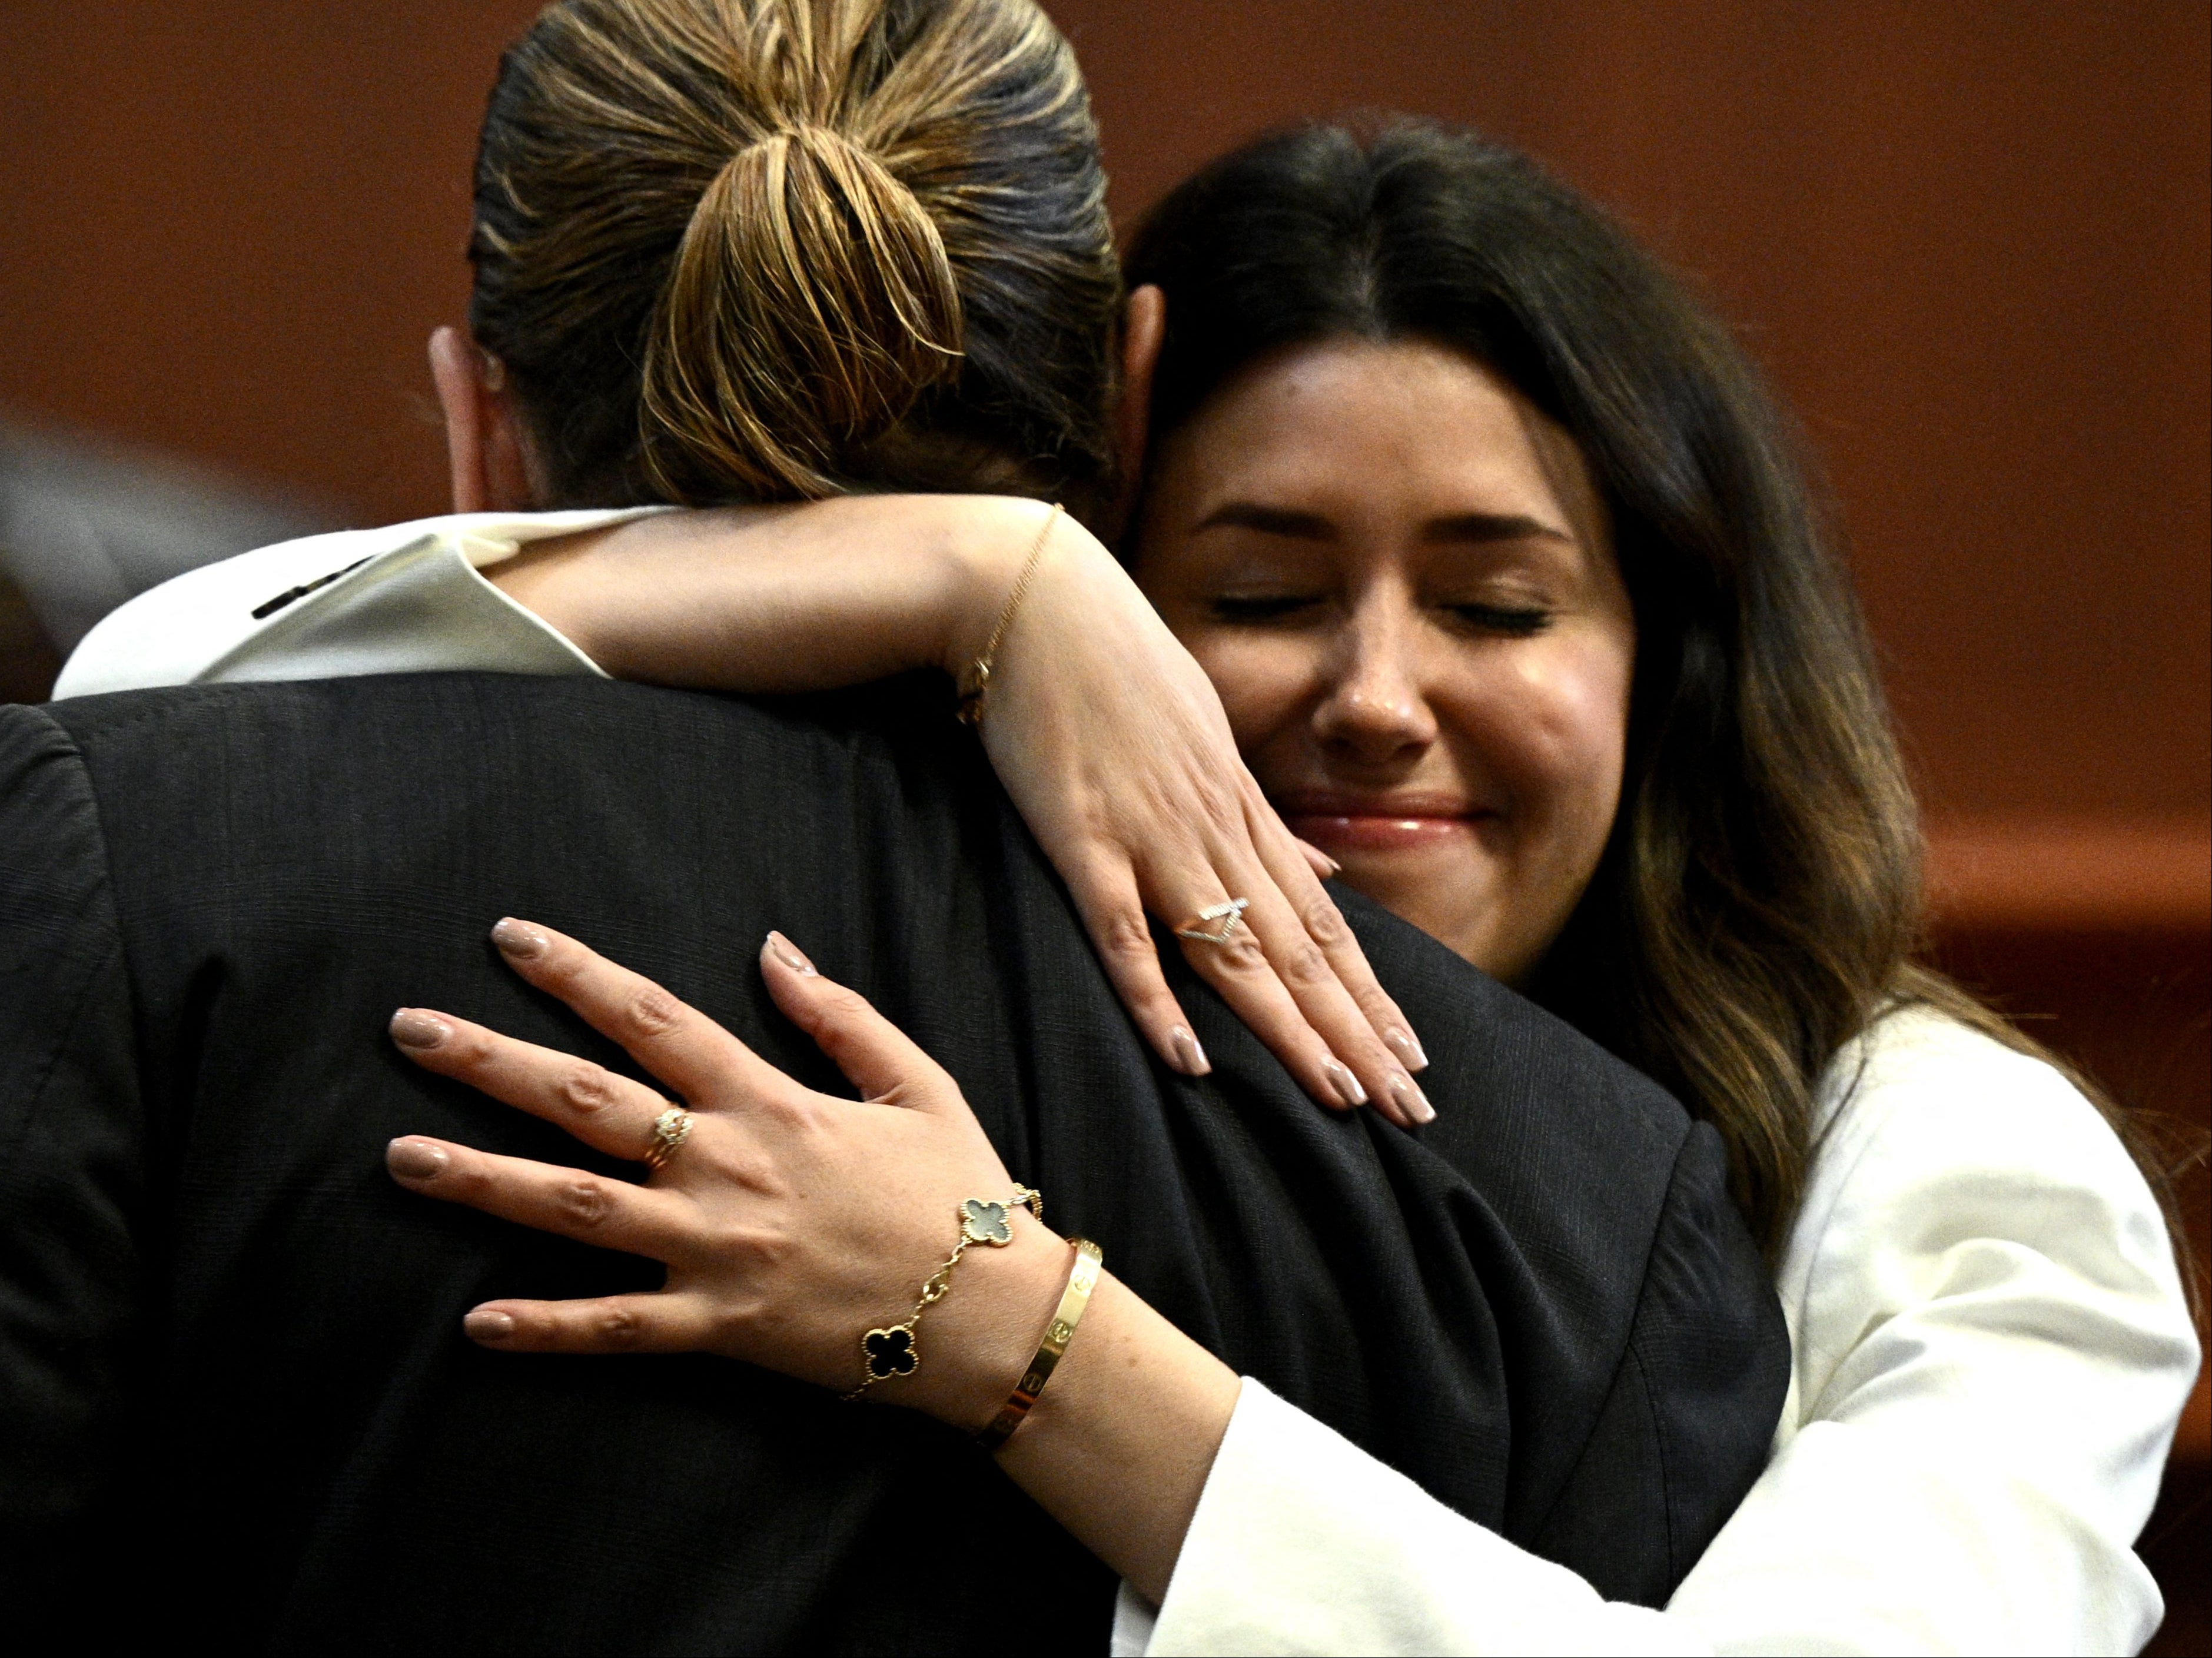 Camille Vasquez and Johnny Depp embrace in the courtroom